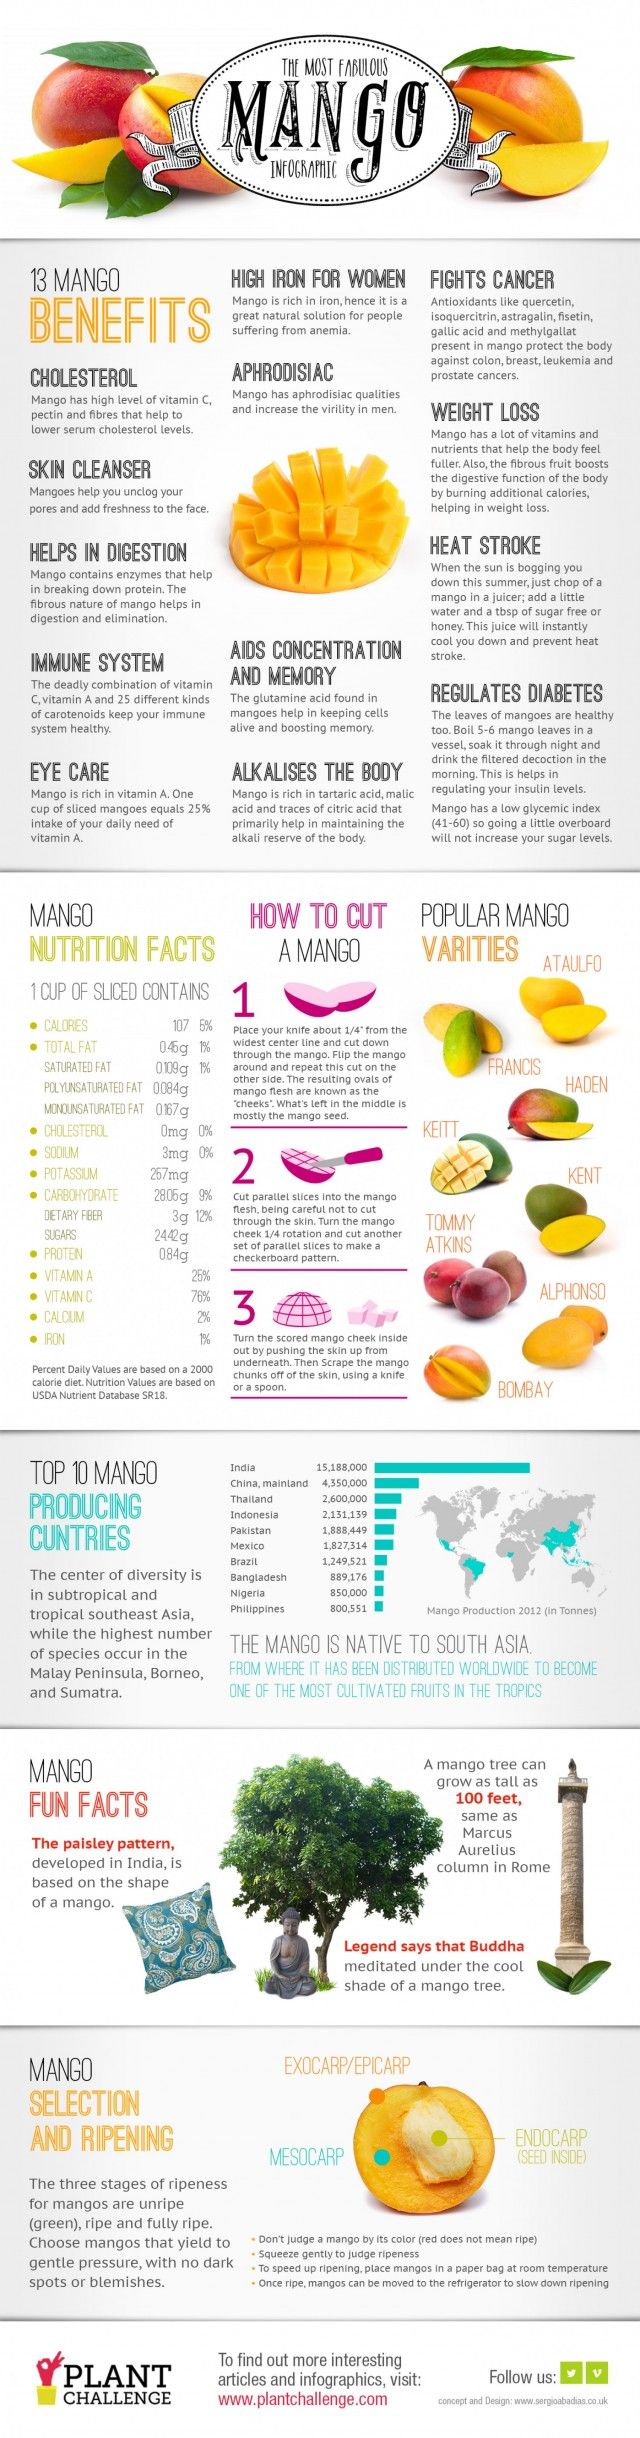 The Most Fabulous Mango Infographic | Daily Infographic